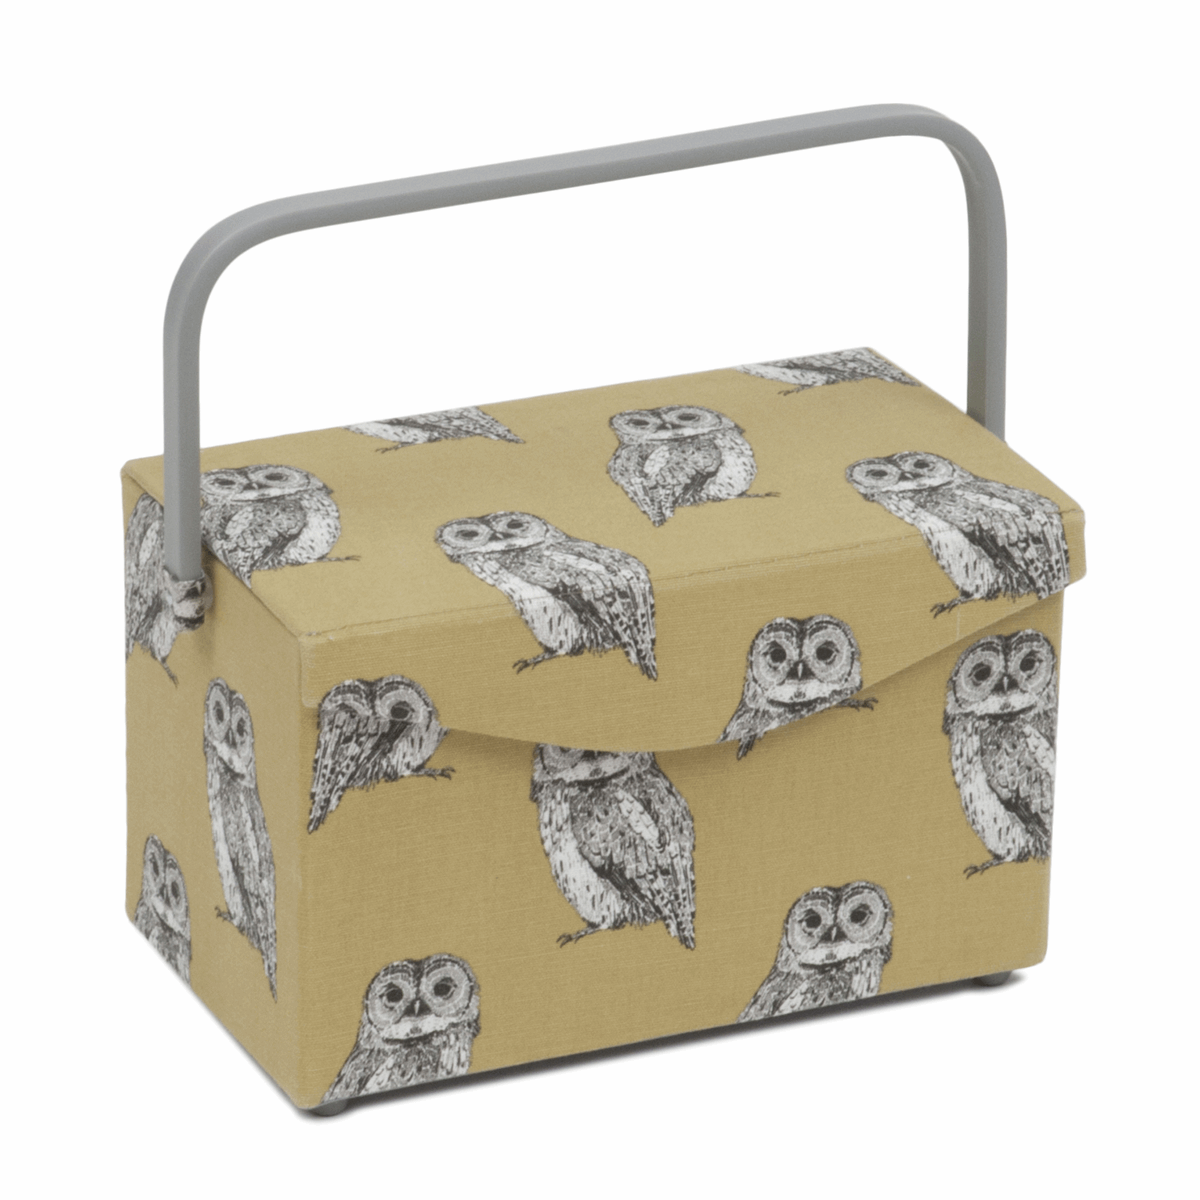 Owlet Sewing Box with Fold Over Lid - Medium